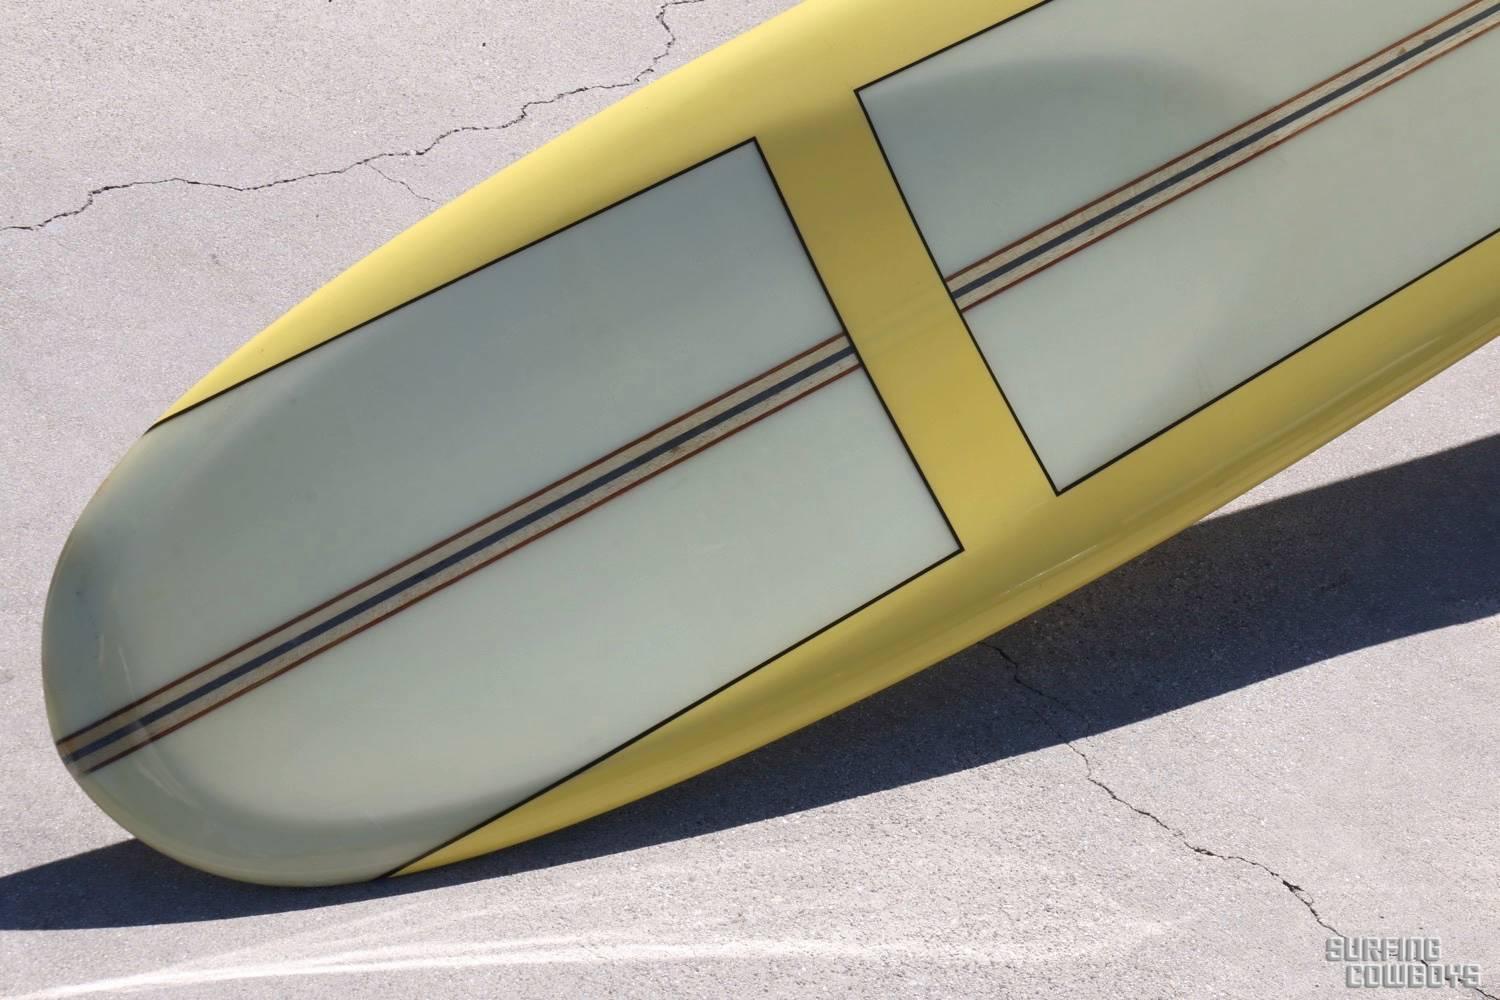 This unbelievably beautiful surfboard is arguably the best noserider ever created. If in doubt check out Joe Aaron riding one on YouTube. 
Yellow rails, black pin striping, five stringers in balsa, redwood and blue. Scooped out nose for nose